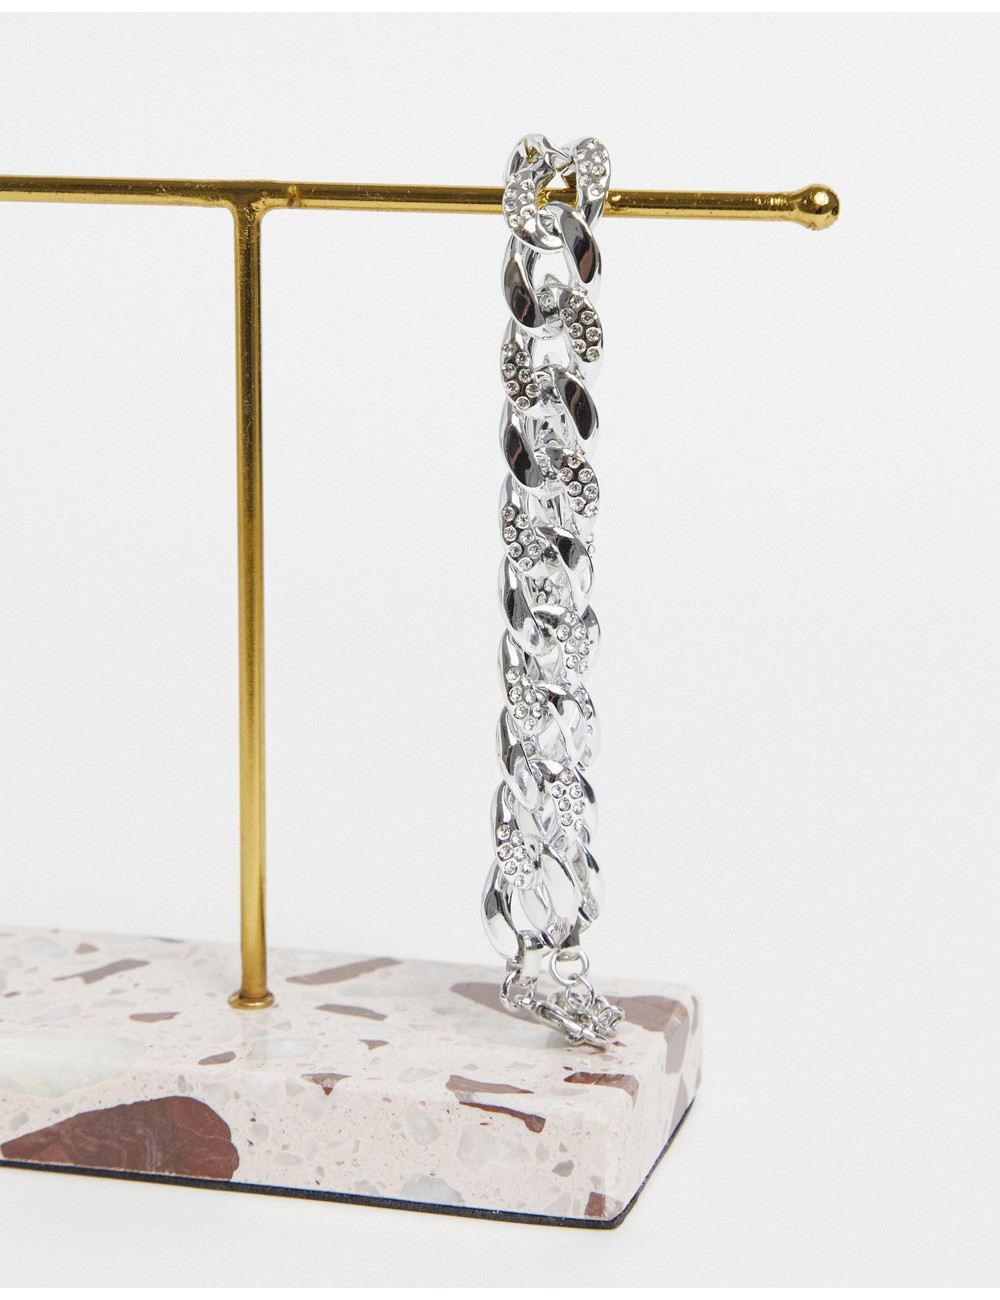 Sass & Belle jewellery stand